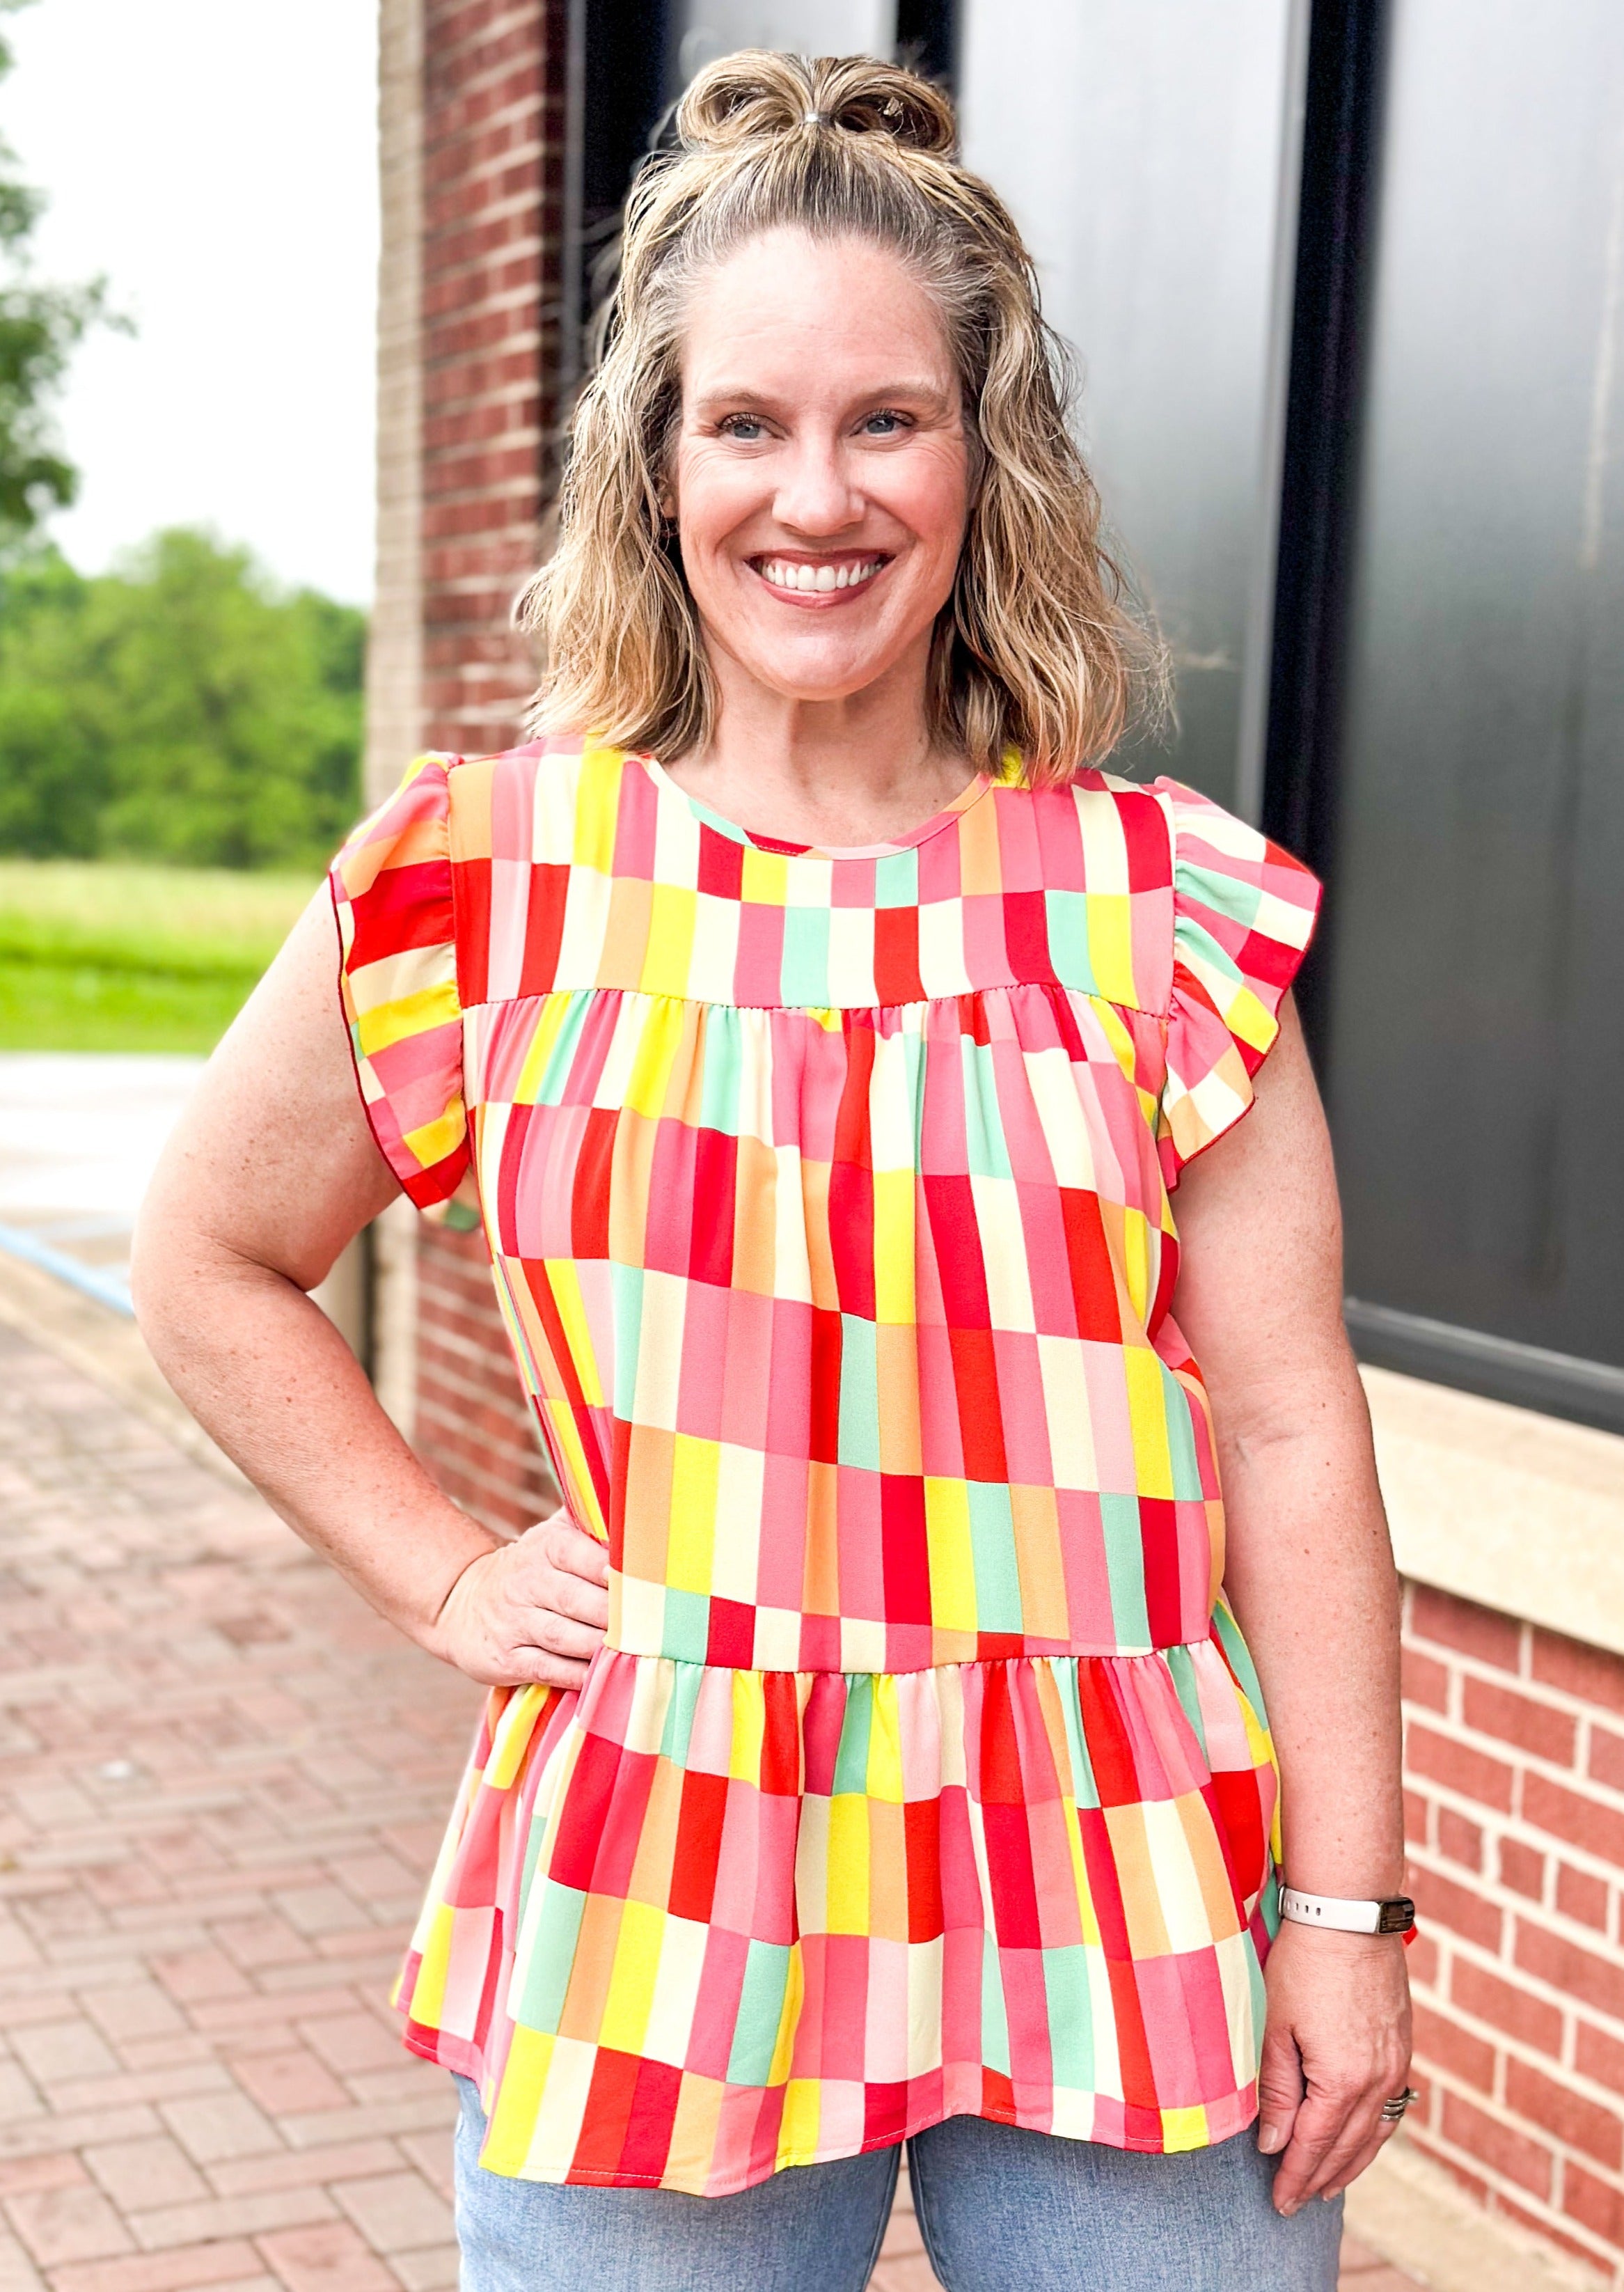 Ruffle Frill Short Sleeve Geometric print top - reds, whites, pinks, yellows, orange and some mint green - round neck - low ruffle - great length